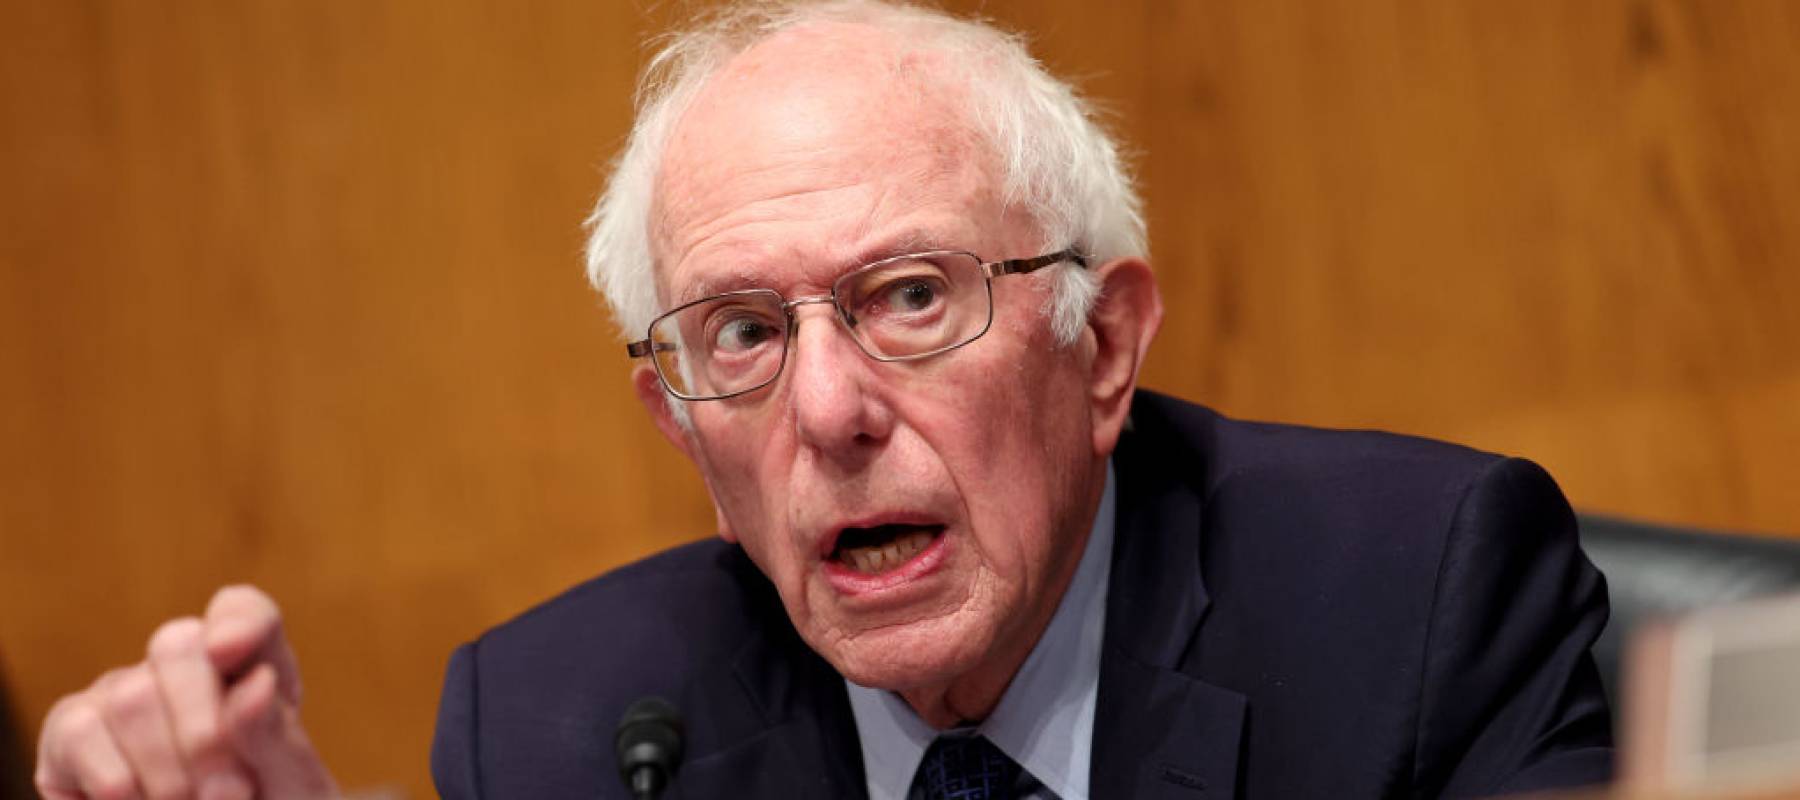 Chairman of the Senate Health, Education, Labor and Pensions Committee Sen. Bernie Sanders seen in a hearing, speaking angrily.